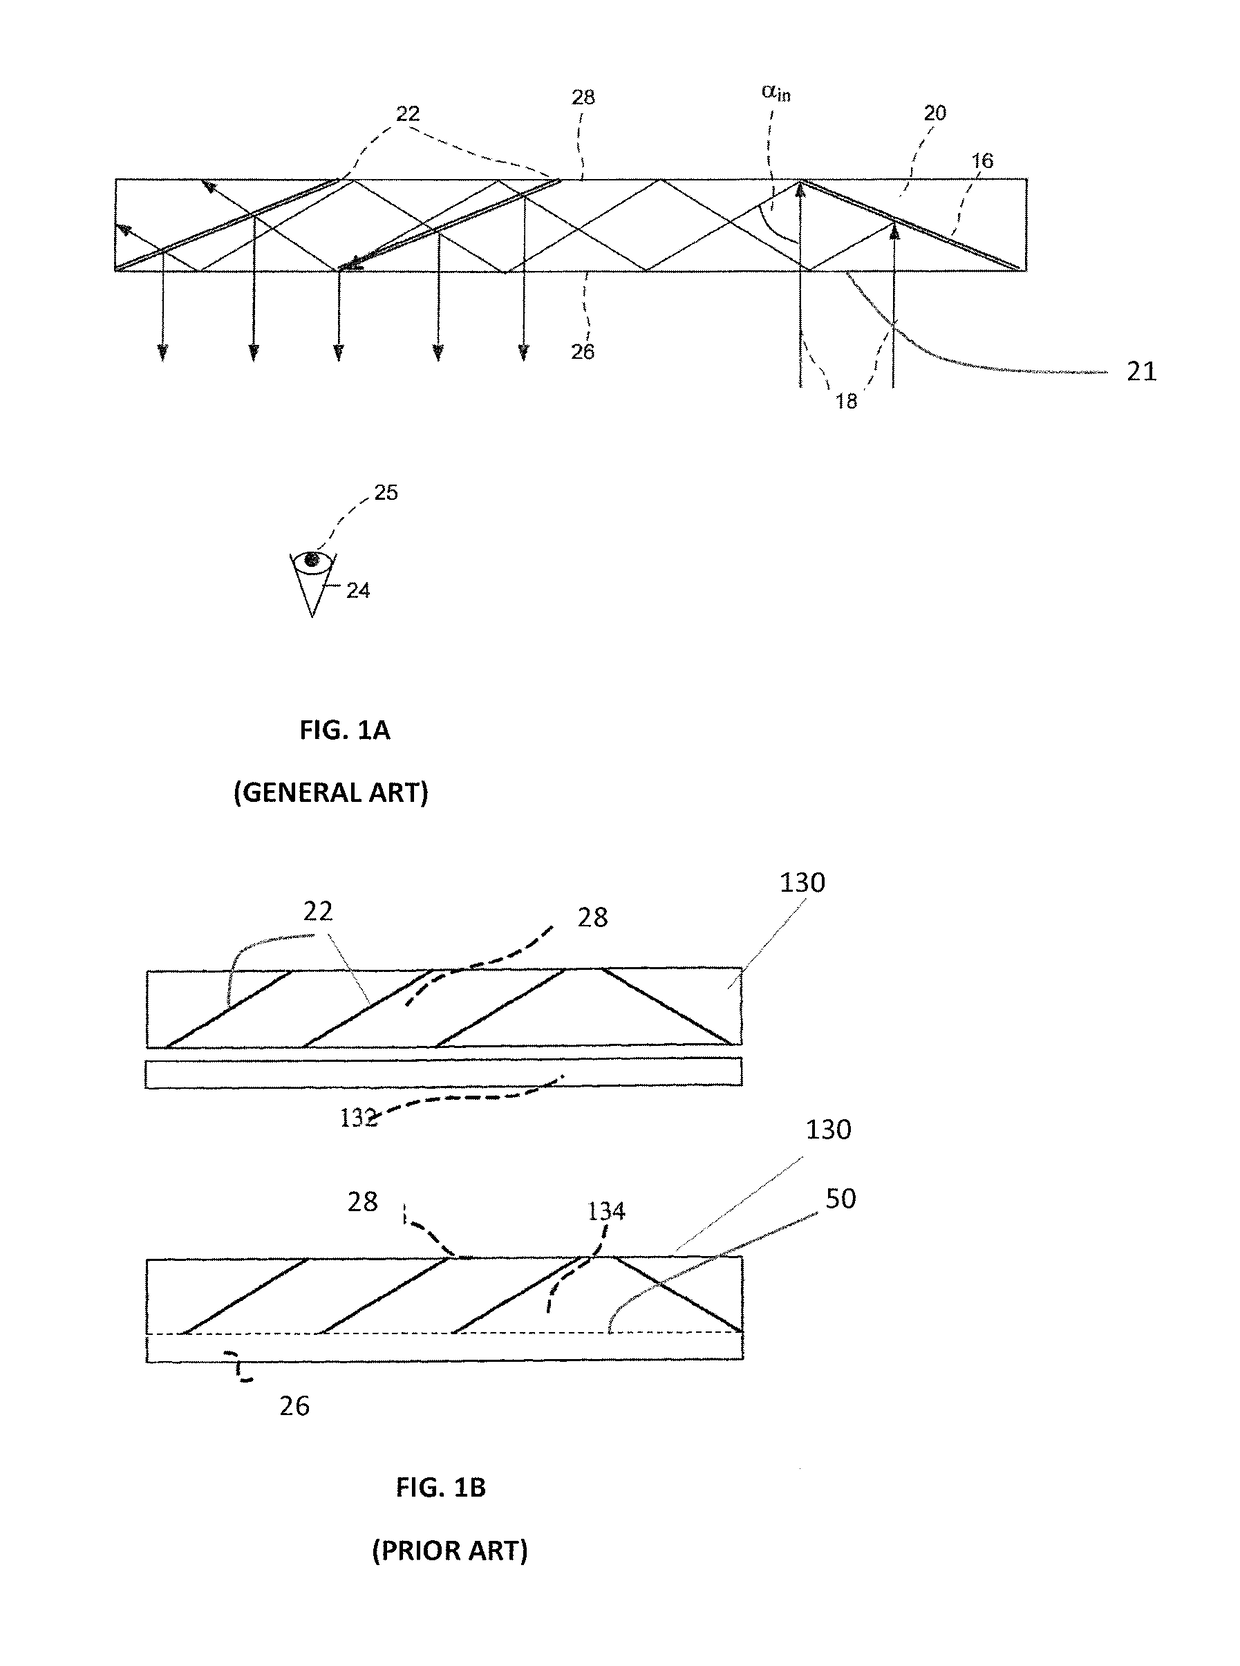 Light-guide optical element and method of its manufacture